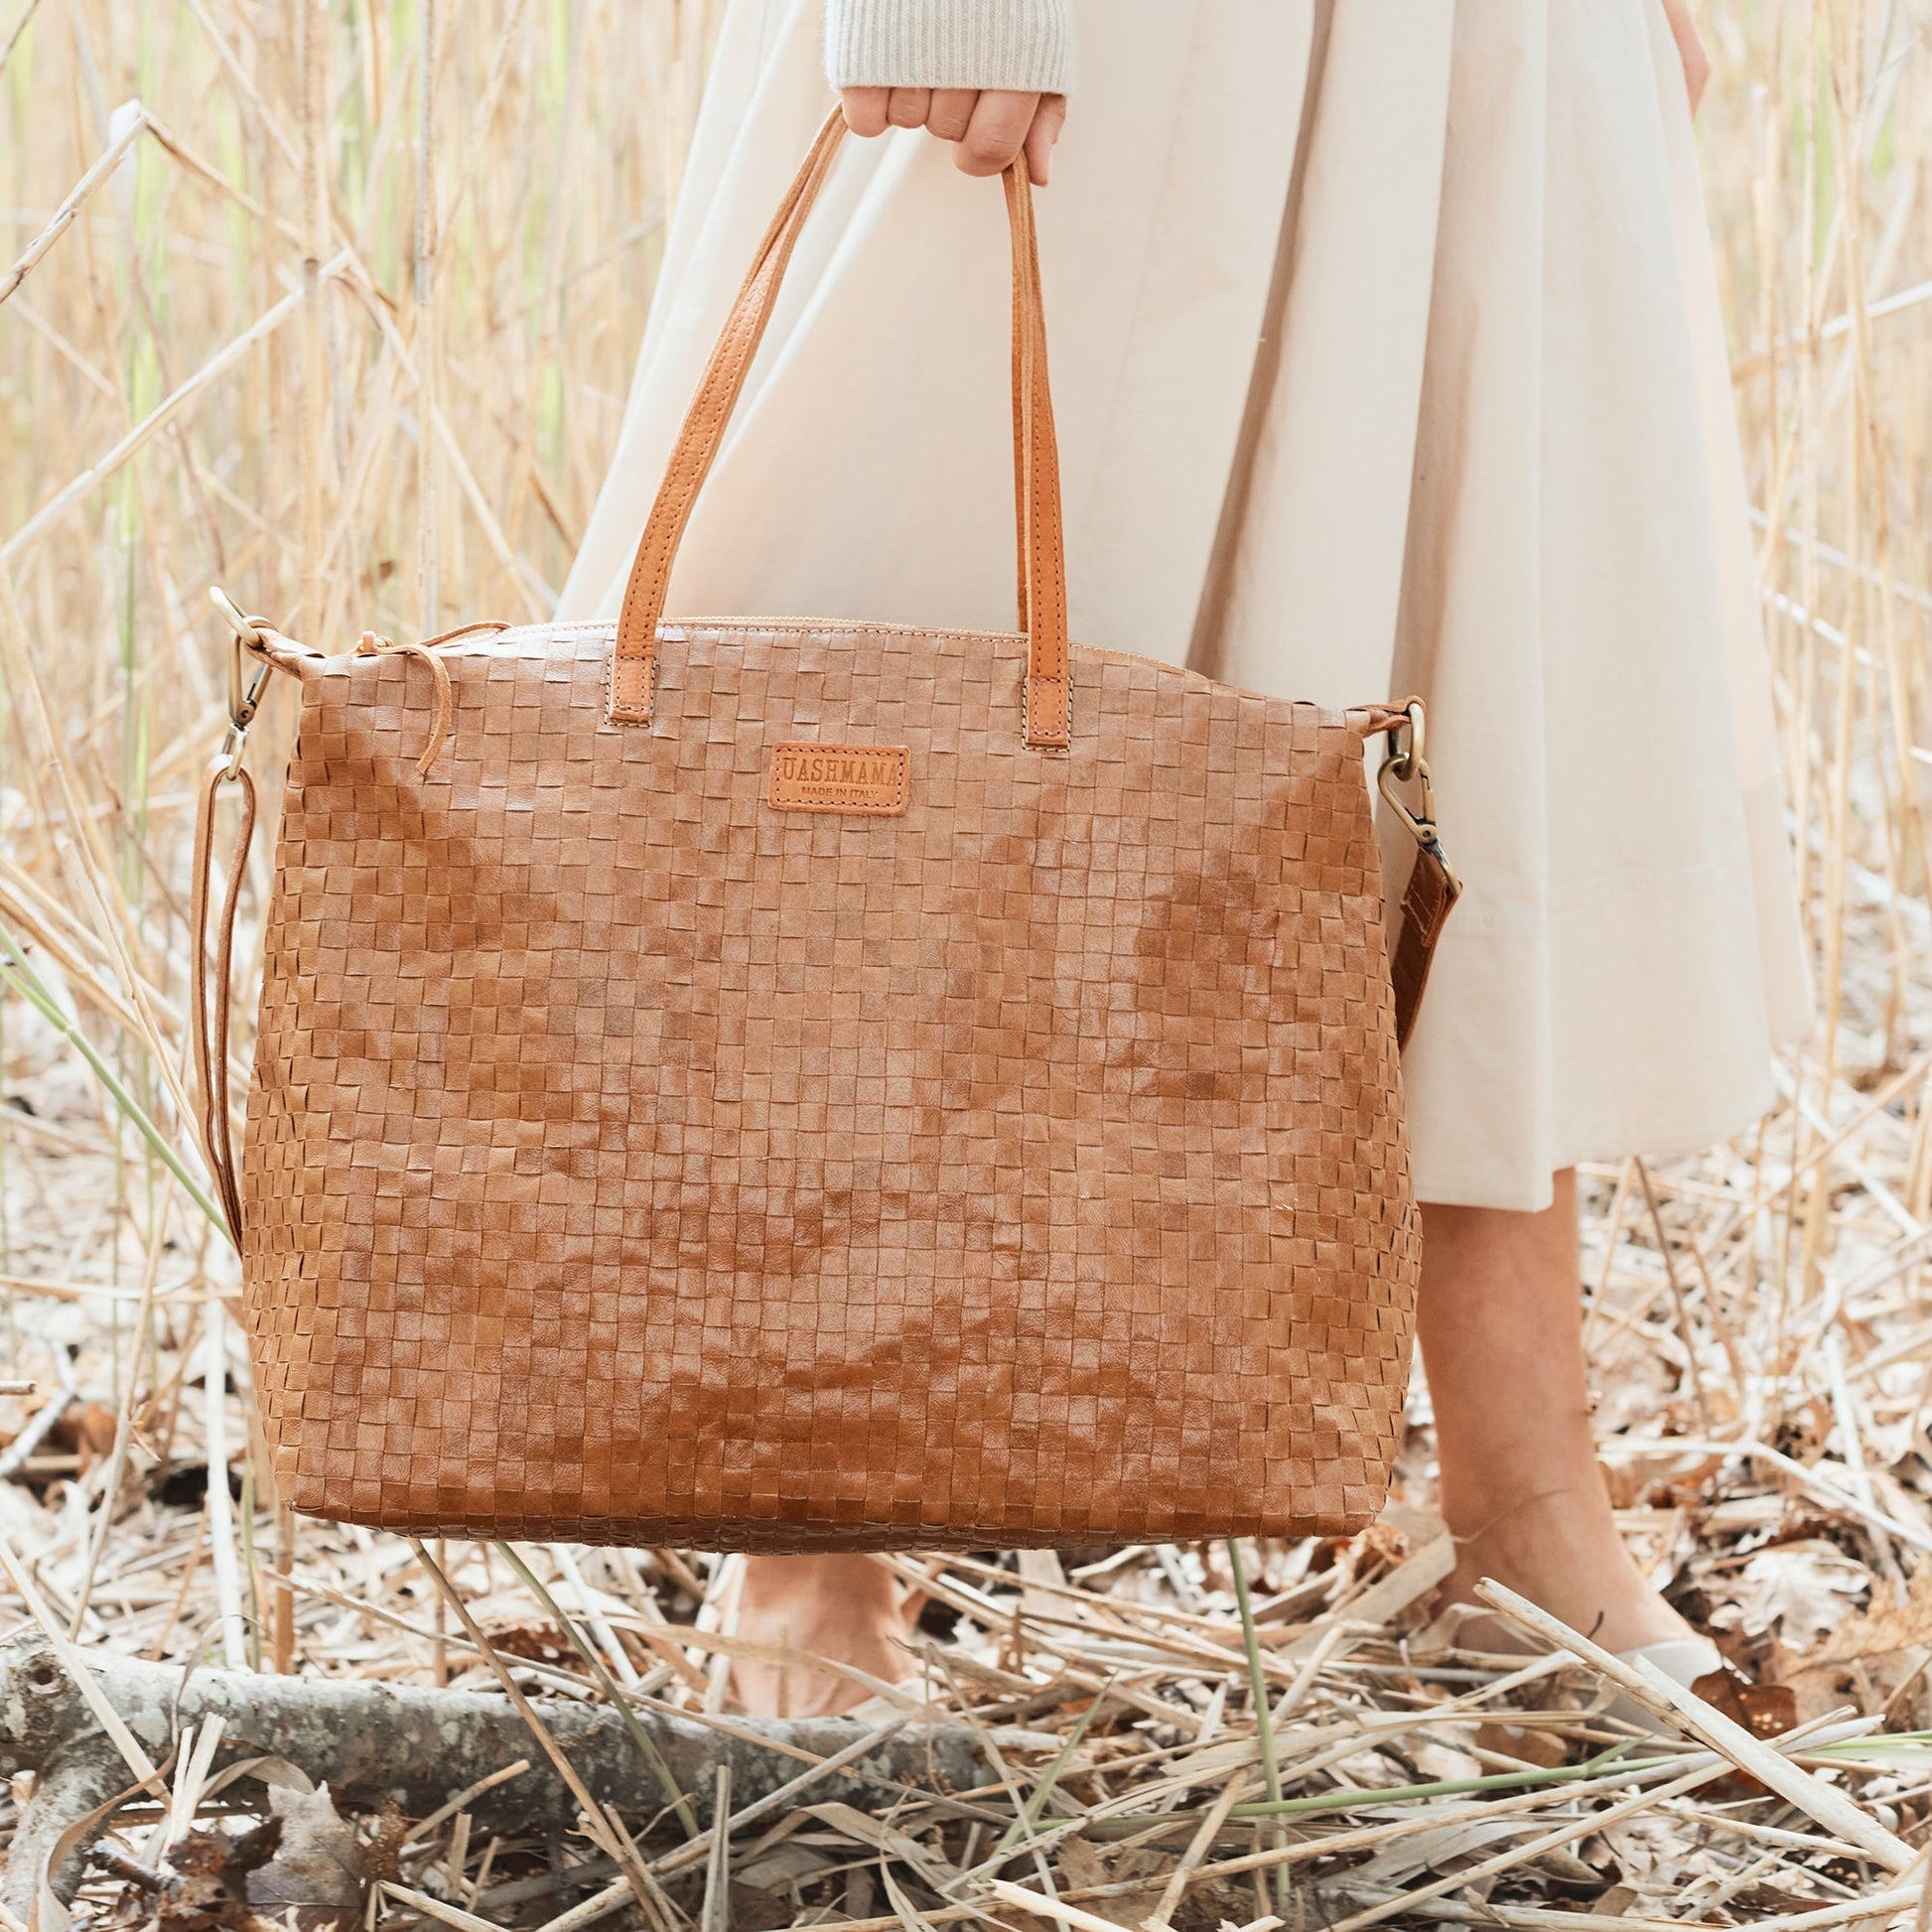 A woman in cream is shown walking through a field at a close up angle. She carries a large tan woven washable paper tote by its top handles.